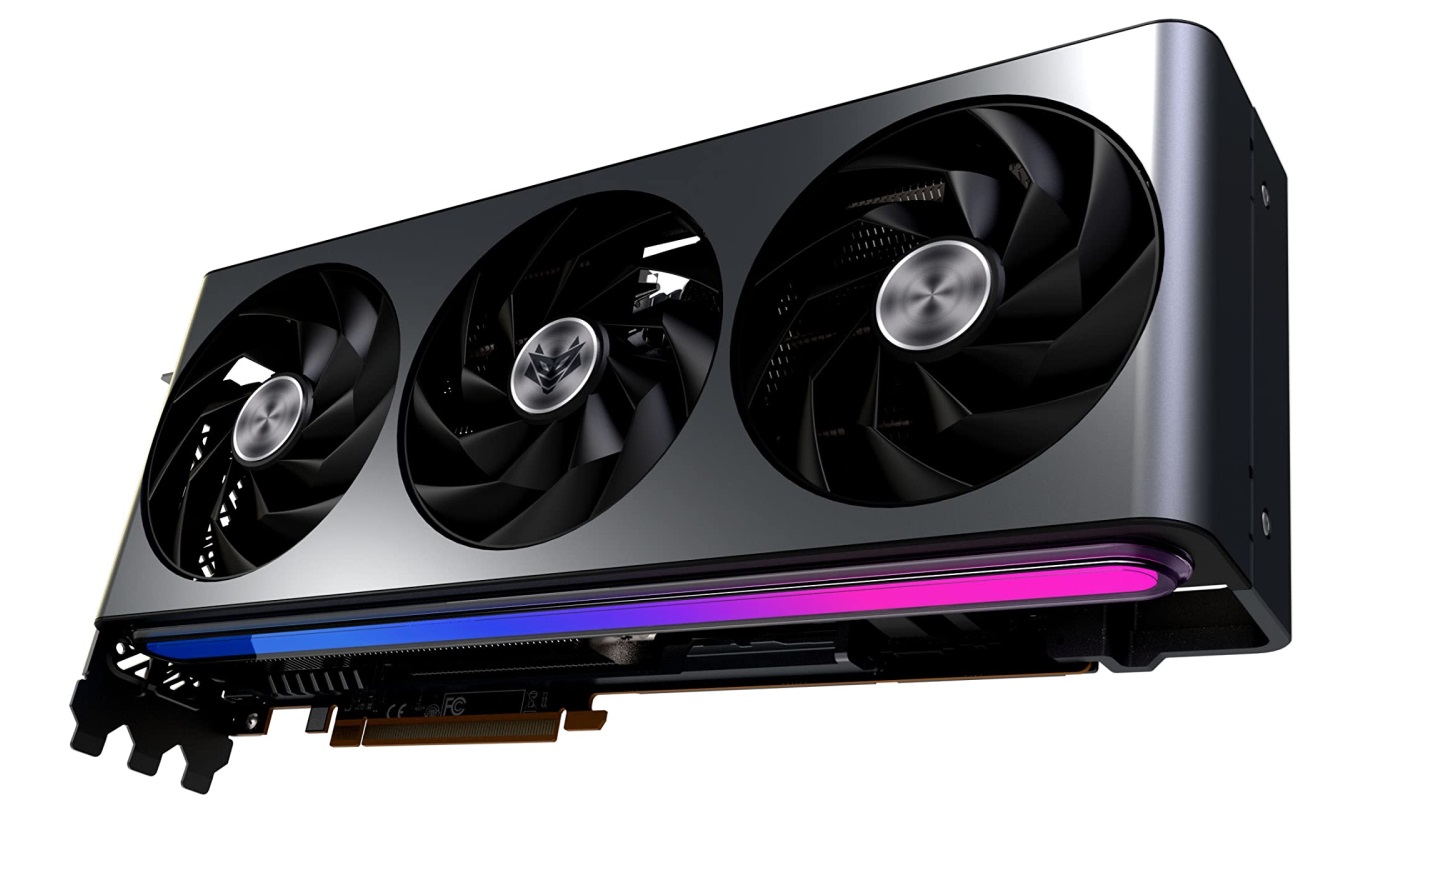 Sapphire issues warning about scam Radeon GPU offers on Amazon